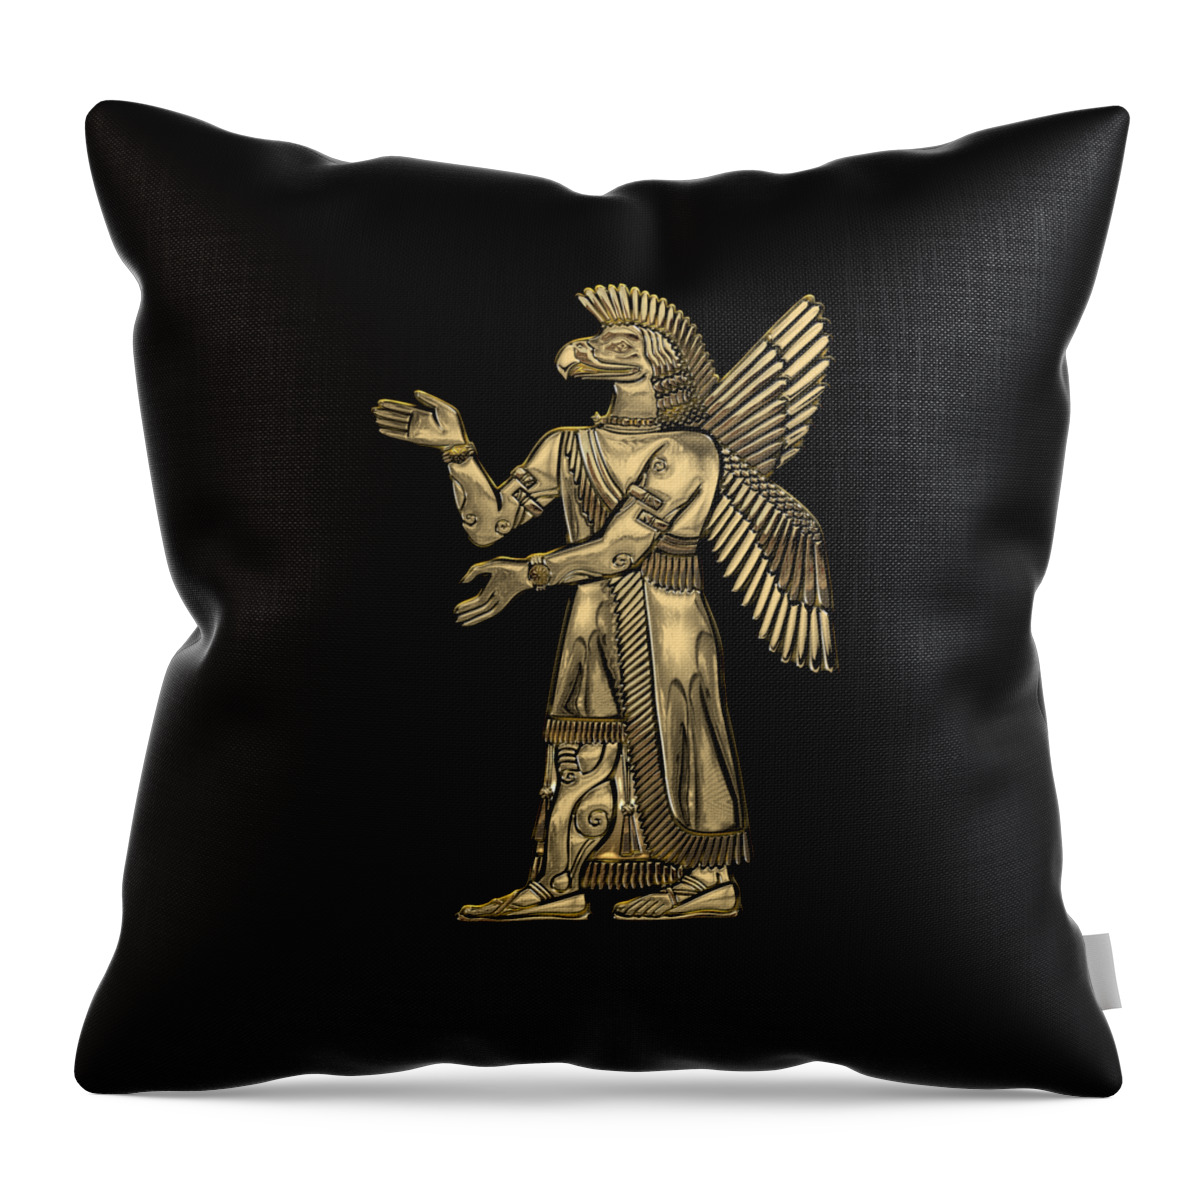 ‘treasures Of Mesopotamia’ Collection By Serge Averbukh Throw Pillow featuring the digital art Sumerian Deities - Gold God Ninurta over Black Canvas by Serge Averbukh